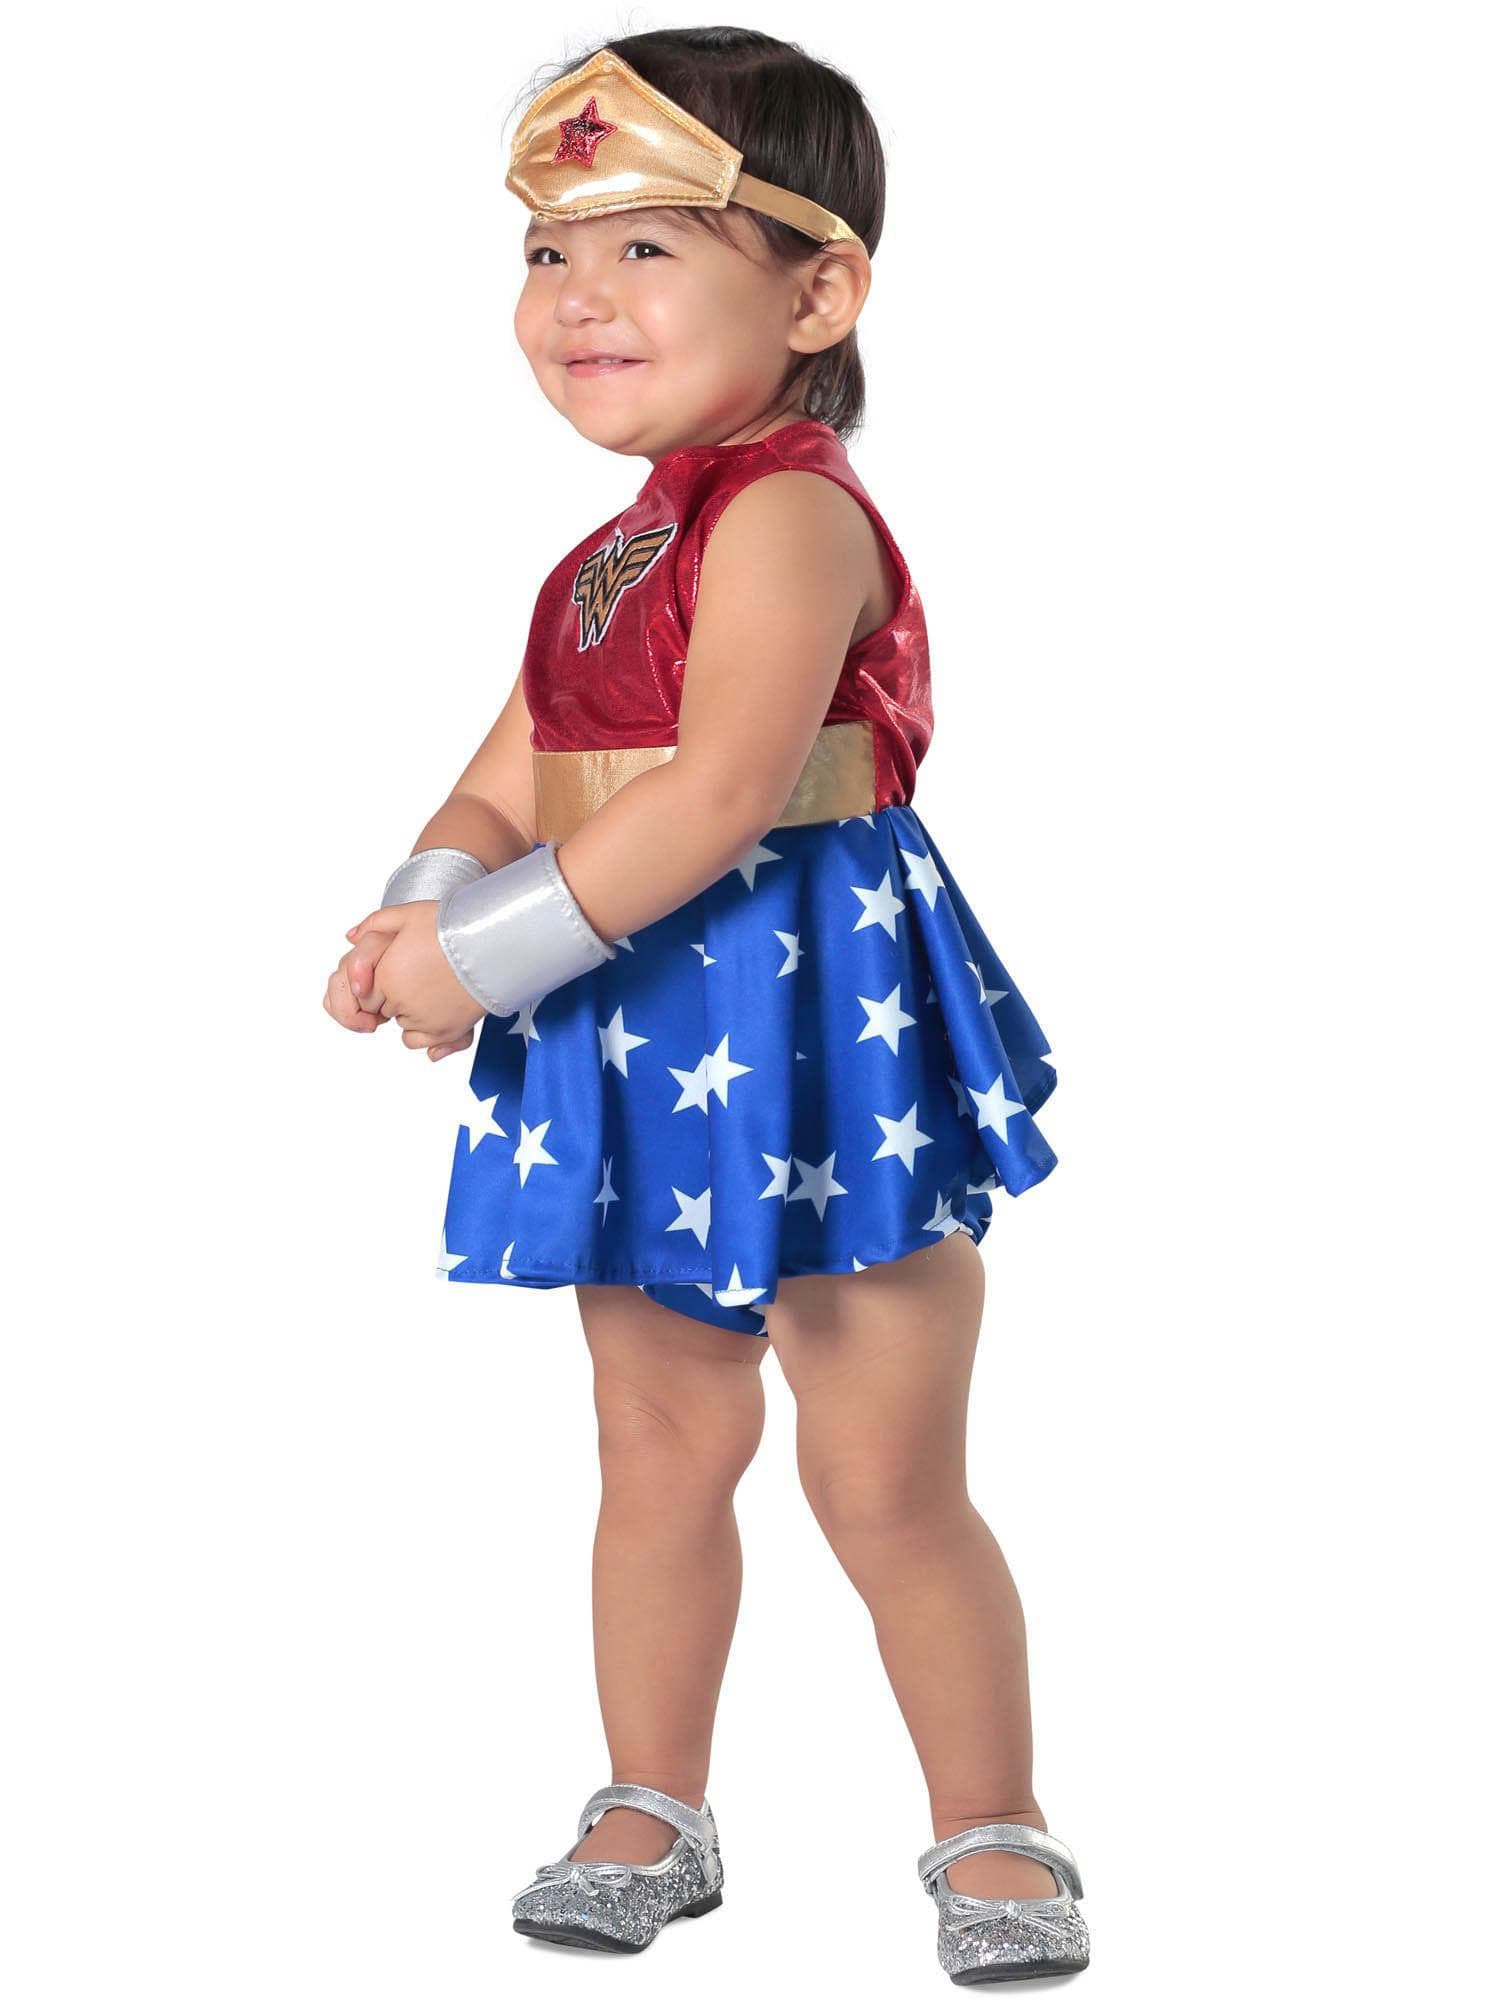 Baby/Toddler Justice League Wonder Woman Dress Costume - costumes.com